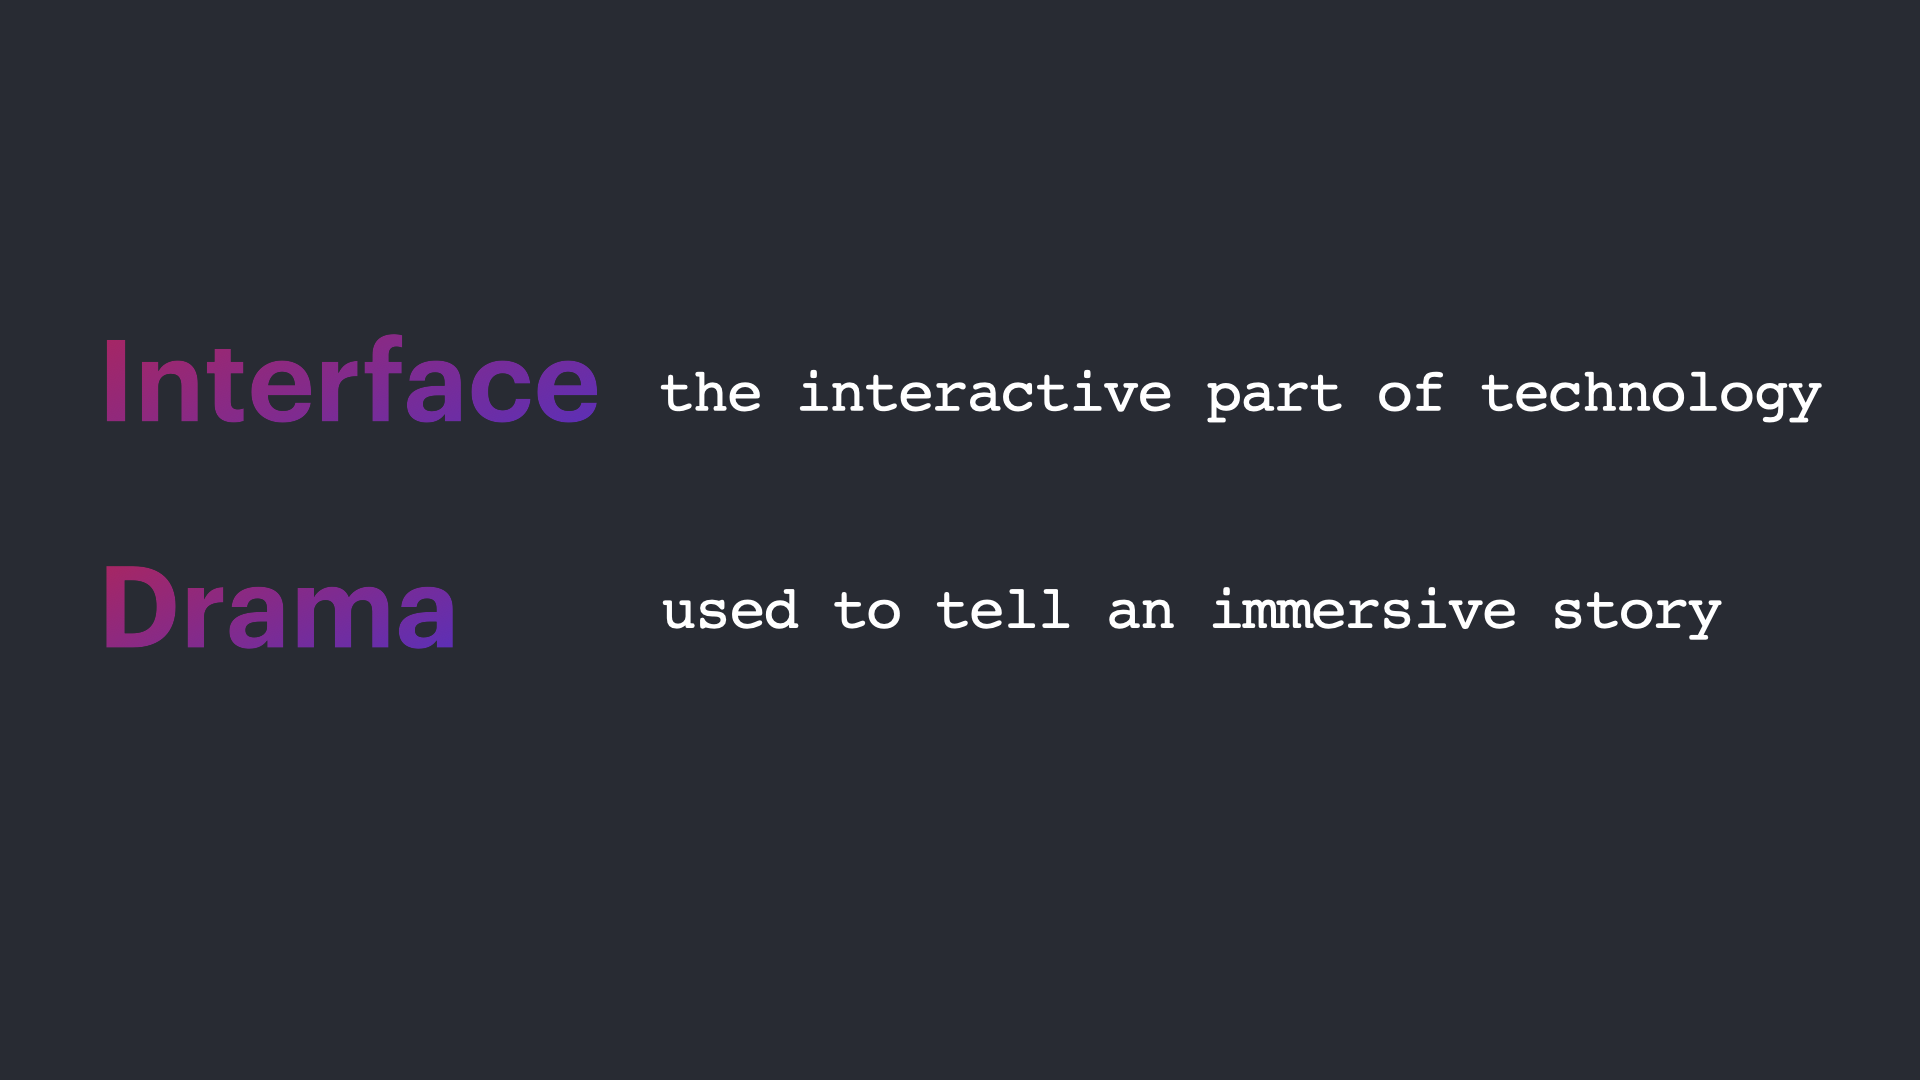 Text: Interface - the interactive part of technology. Drama - used to tell an immersive story.